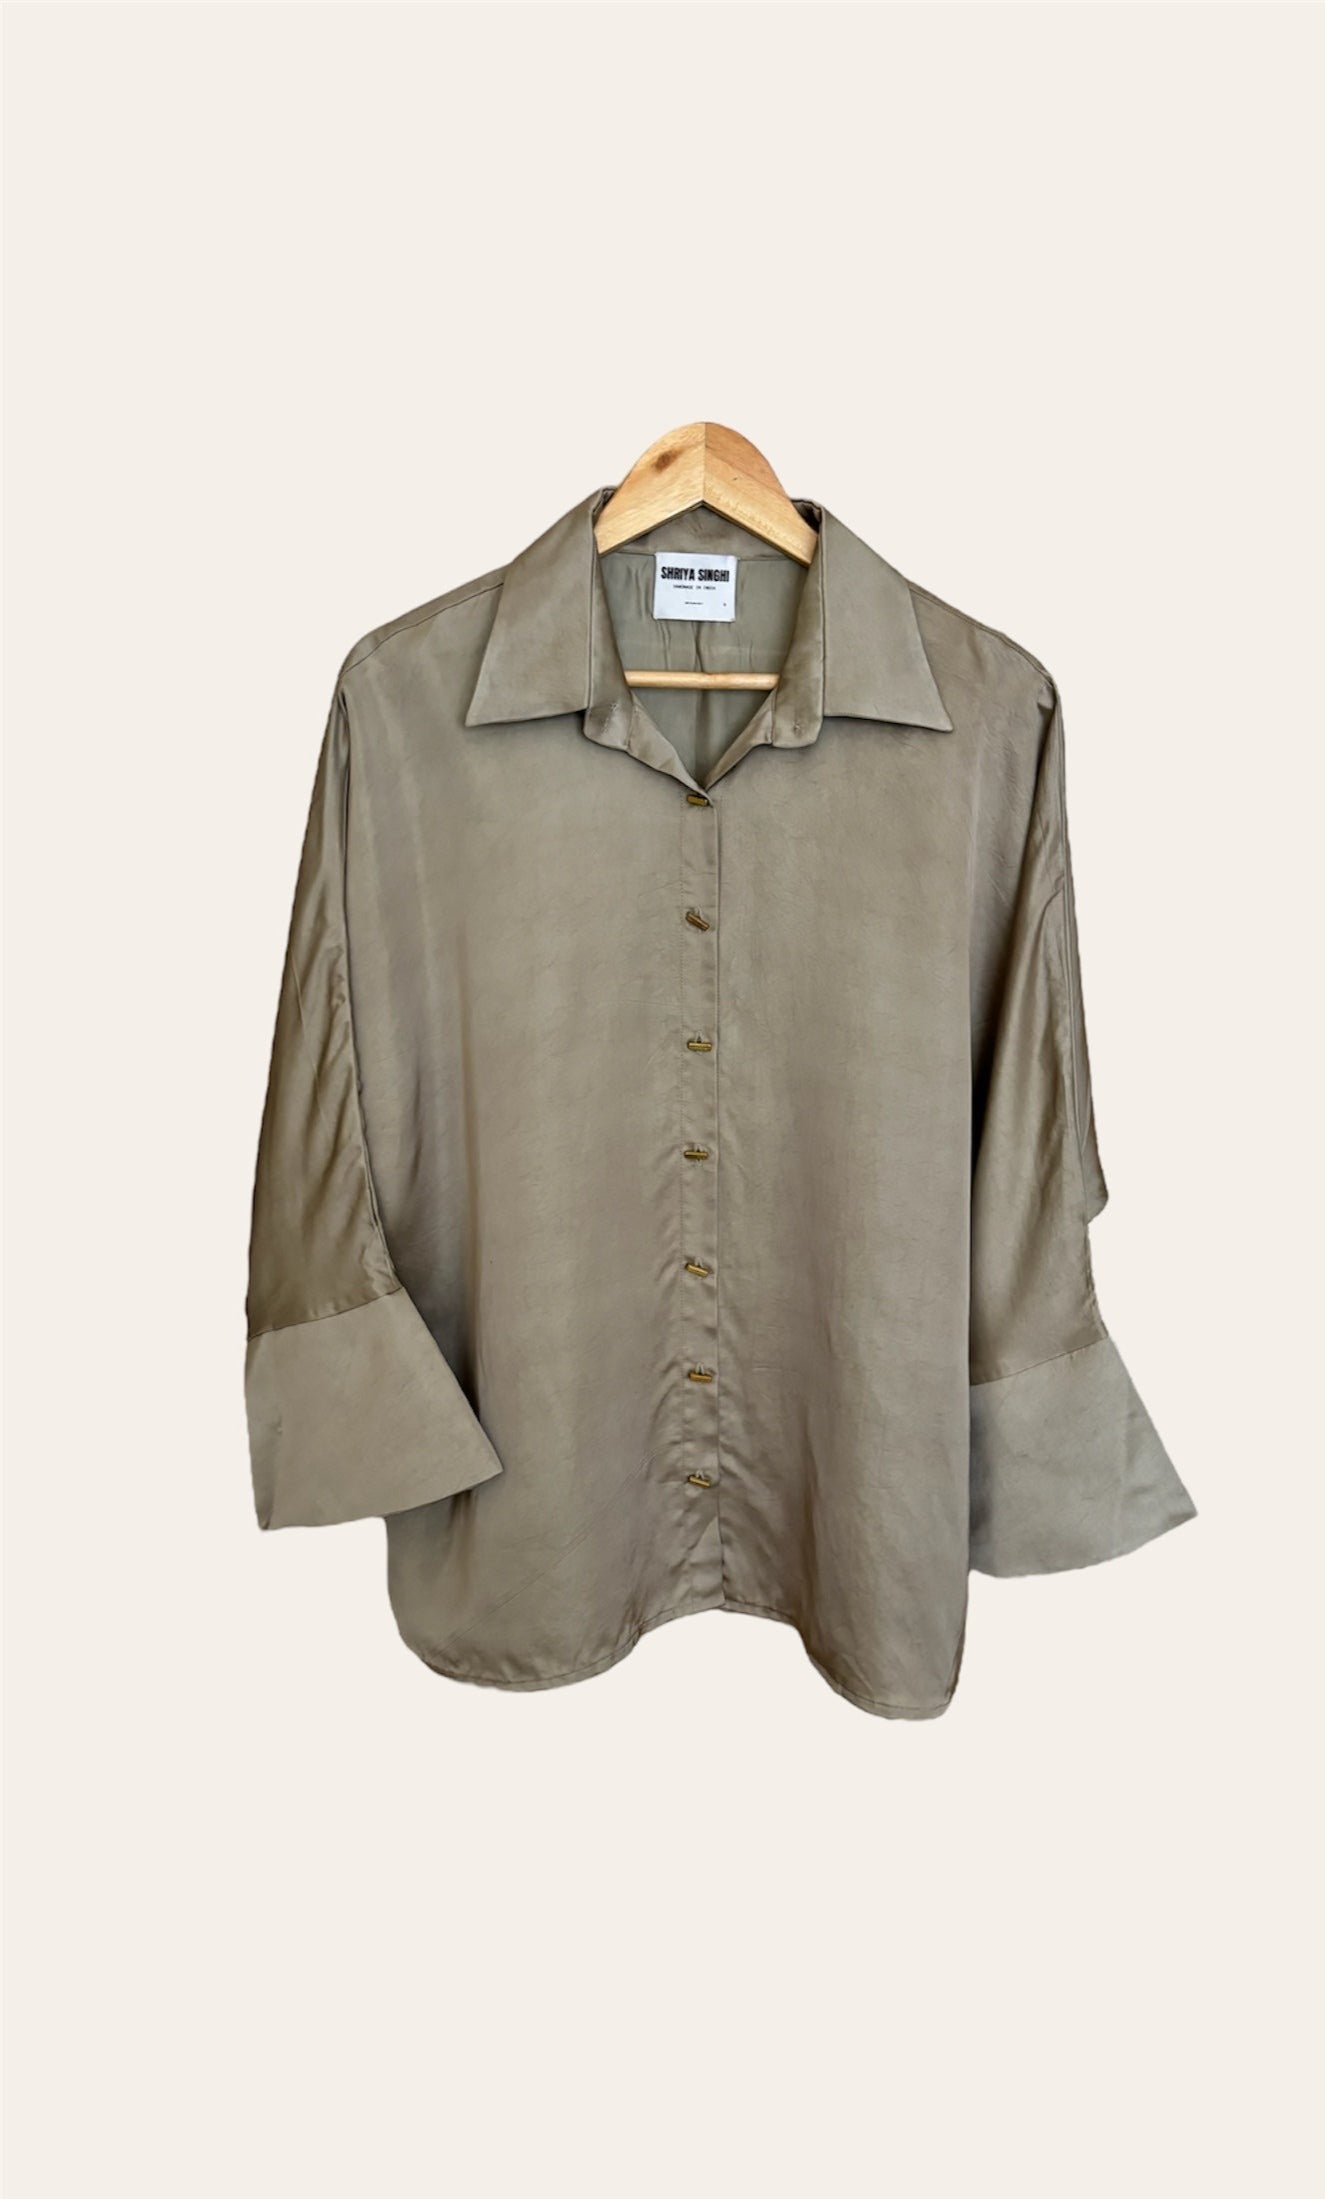 Lea One Size Shirt In Taupe